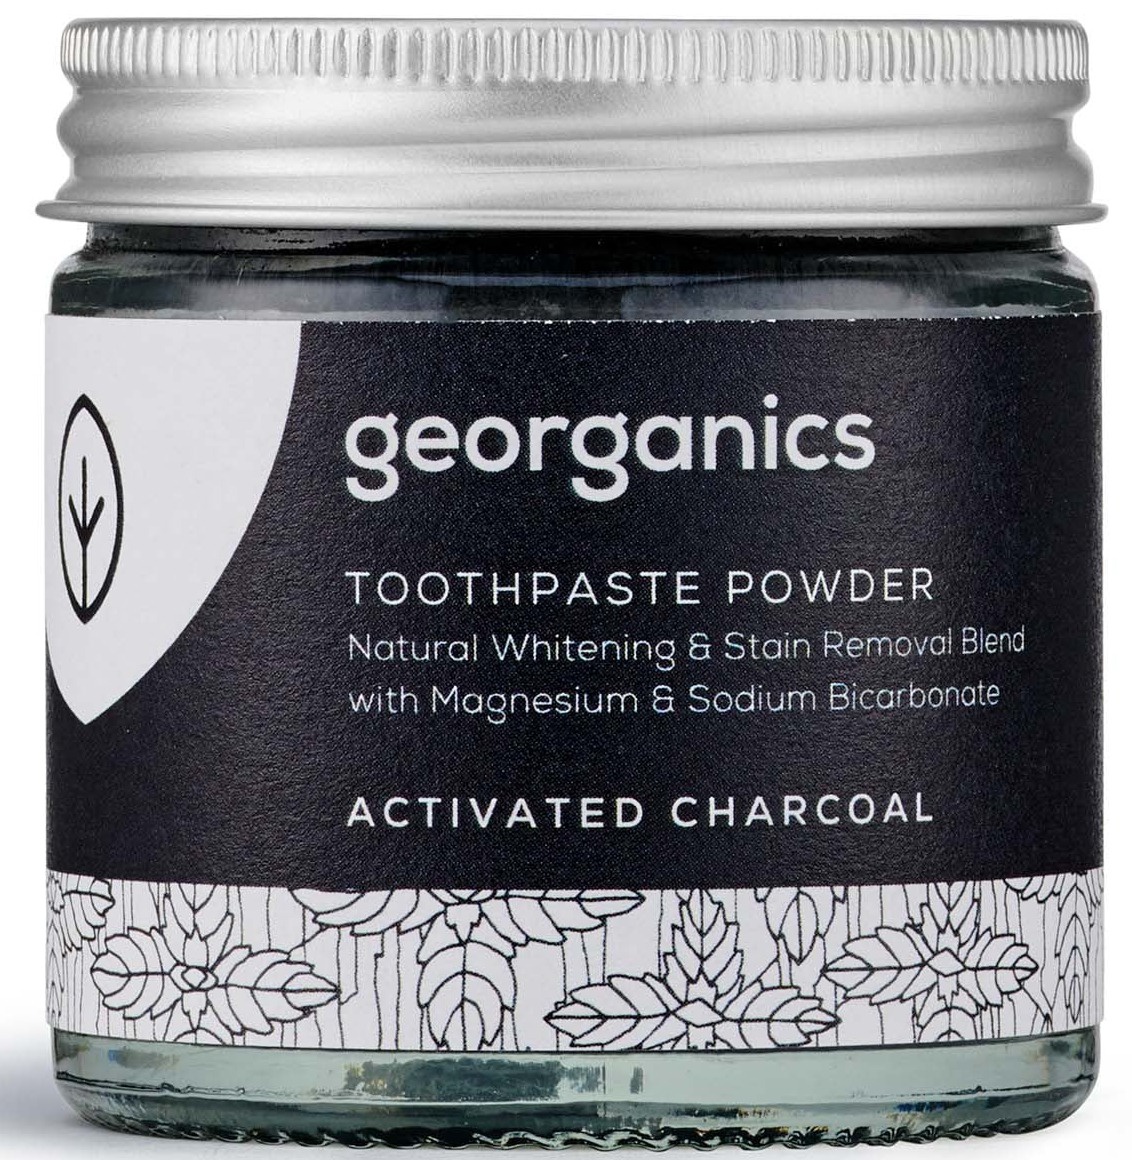 Georganics Mineral Toothpaste Powder - Activated Charcoal